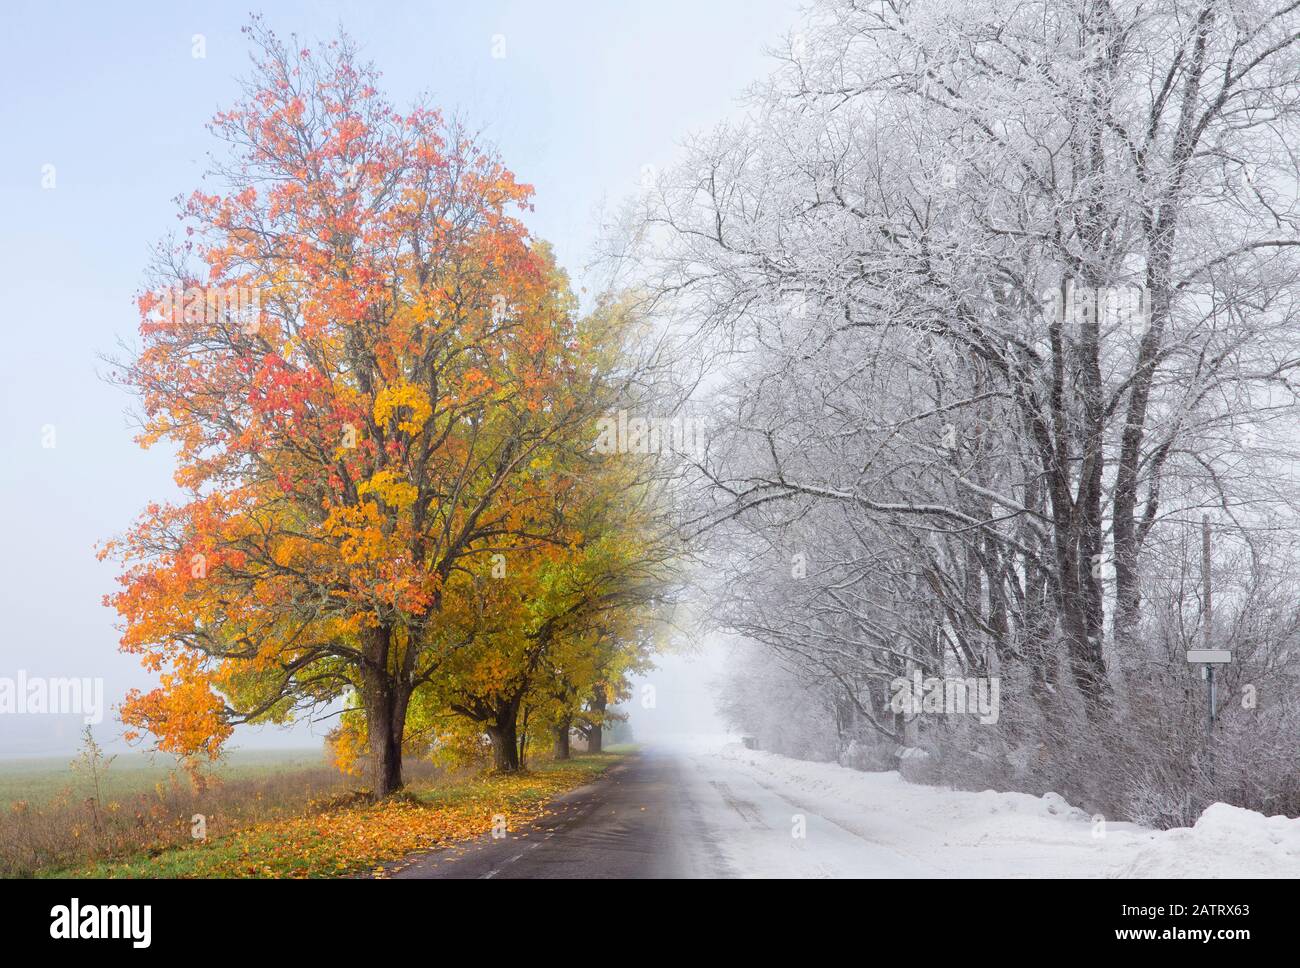 A fall that turned into winter. - a Royalty Free Stock Photo from